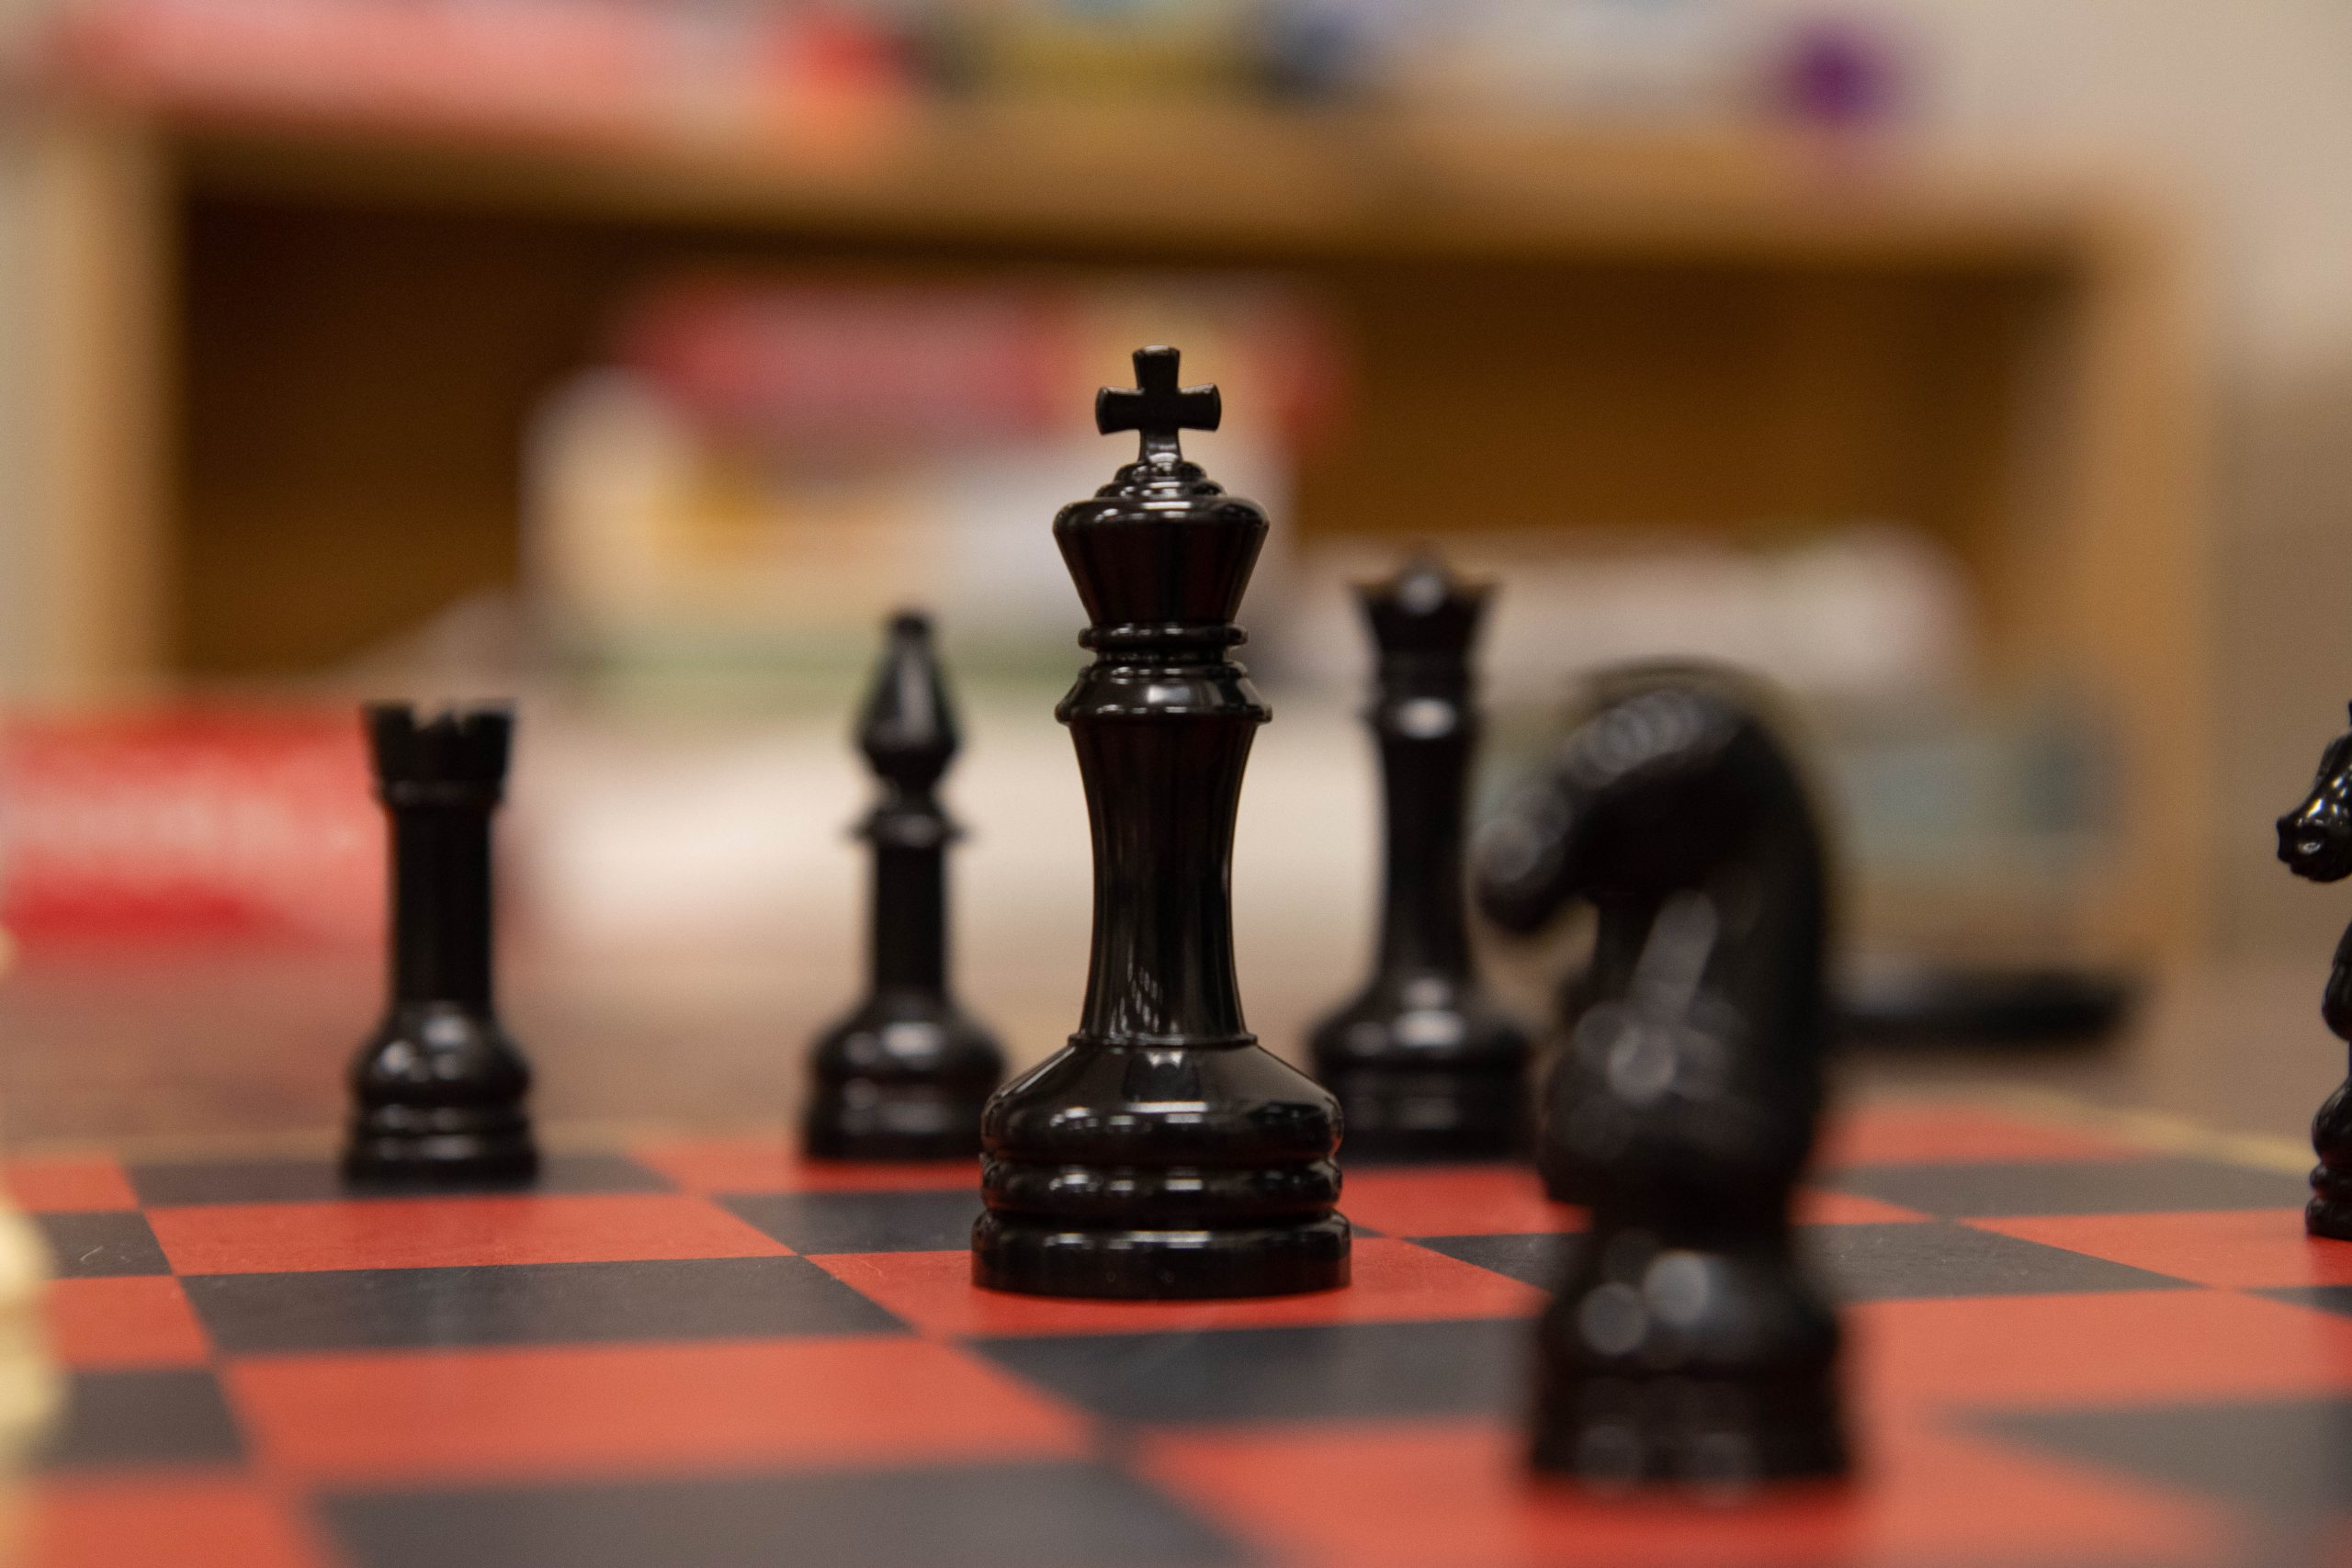 The great chess 'cheating' scandal revisited